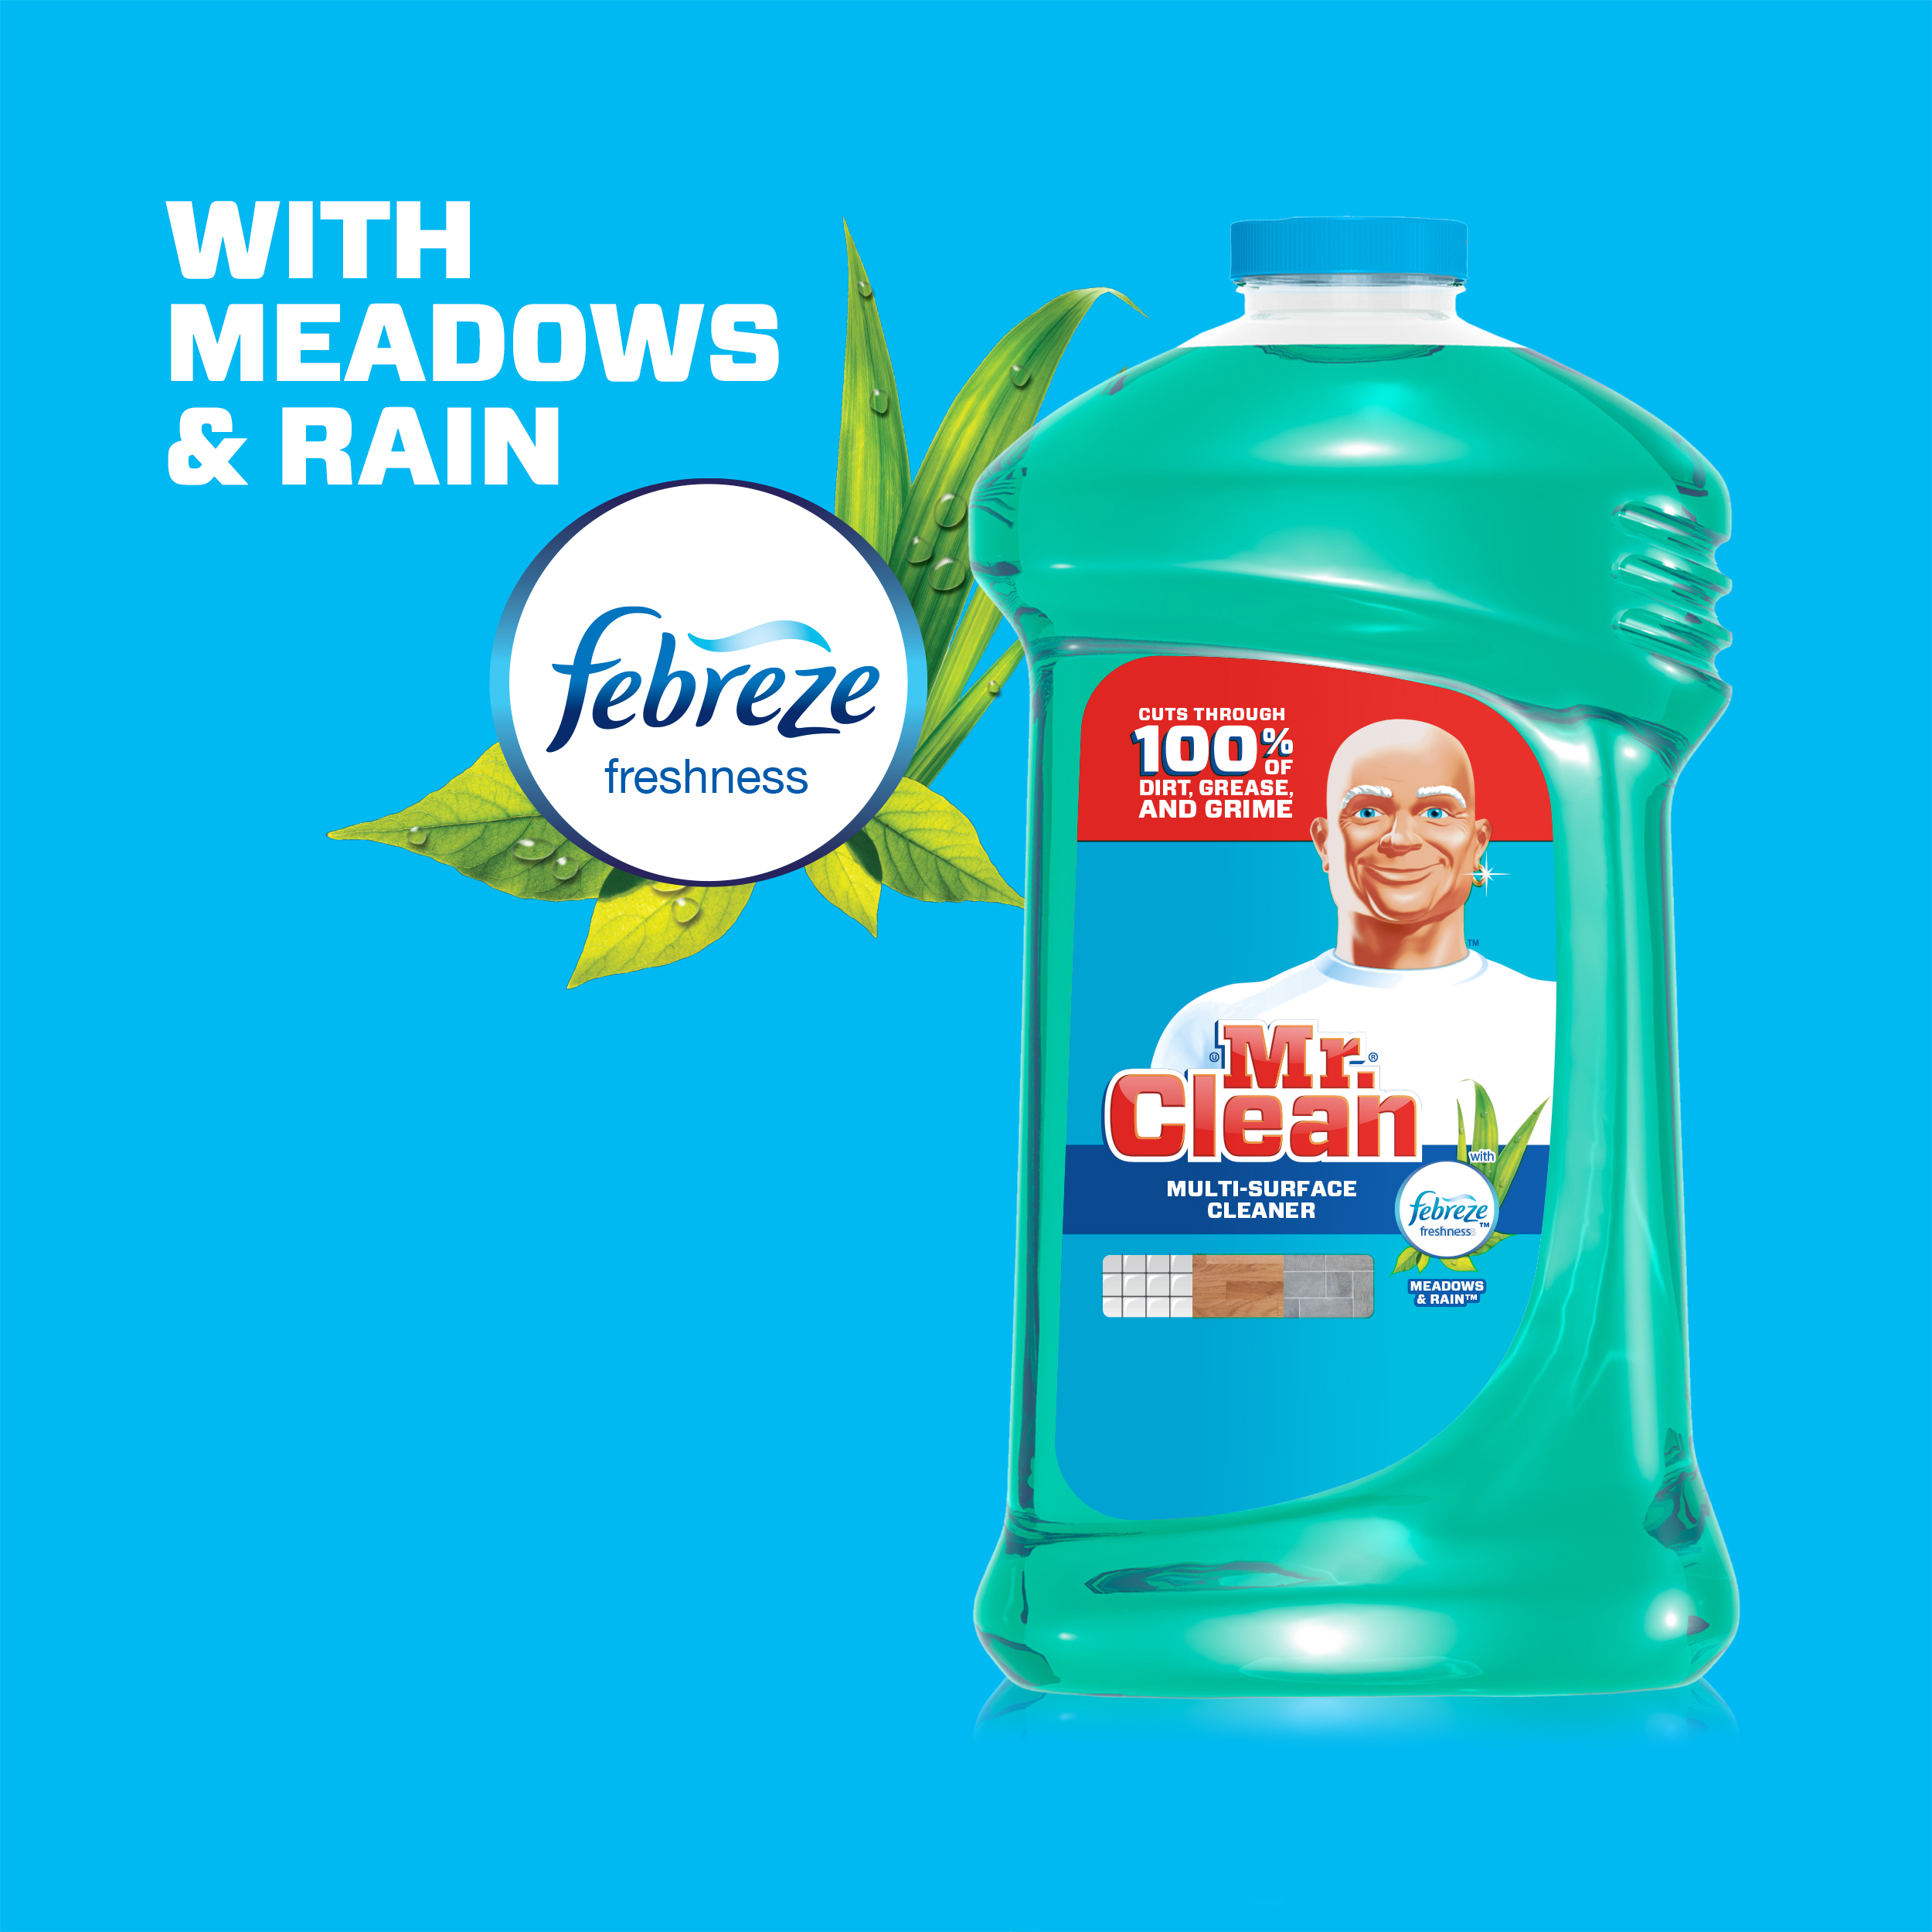 Mr. Clean Multi-Surface Cleaner with Febreze Freshness, Meadows & Rain, 128 fl oz - image 4 of 6